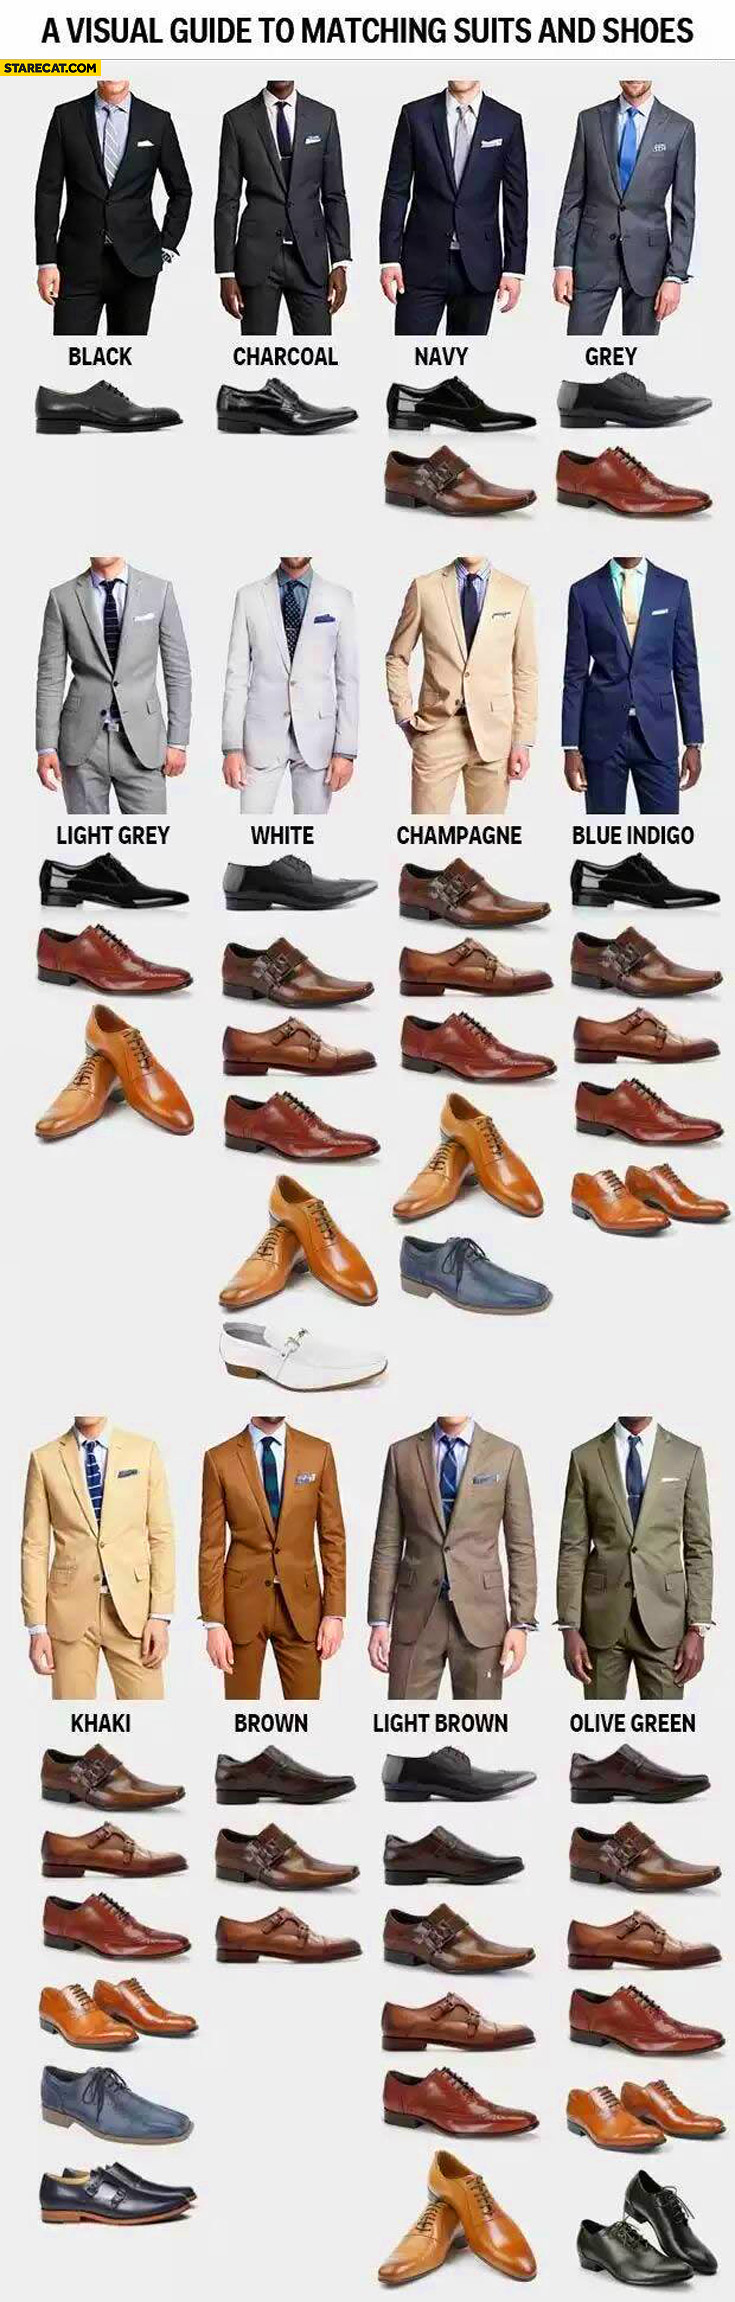 A visual guide to matching suits and shoes colors for men infographic